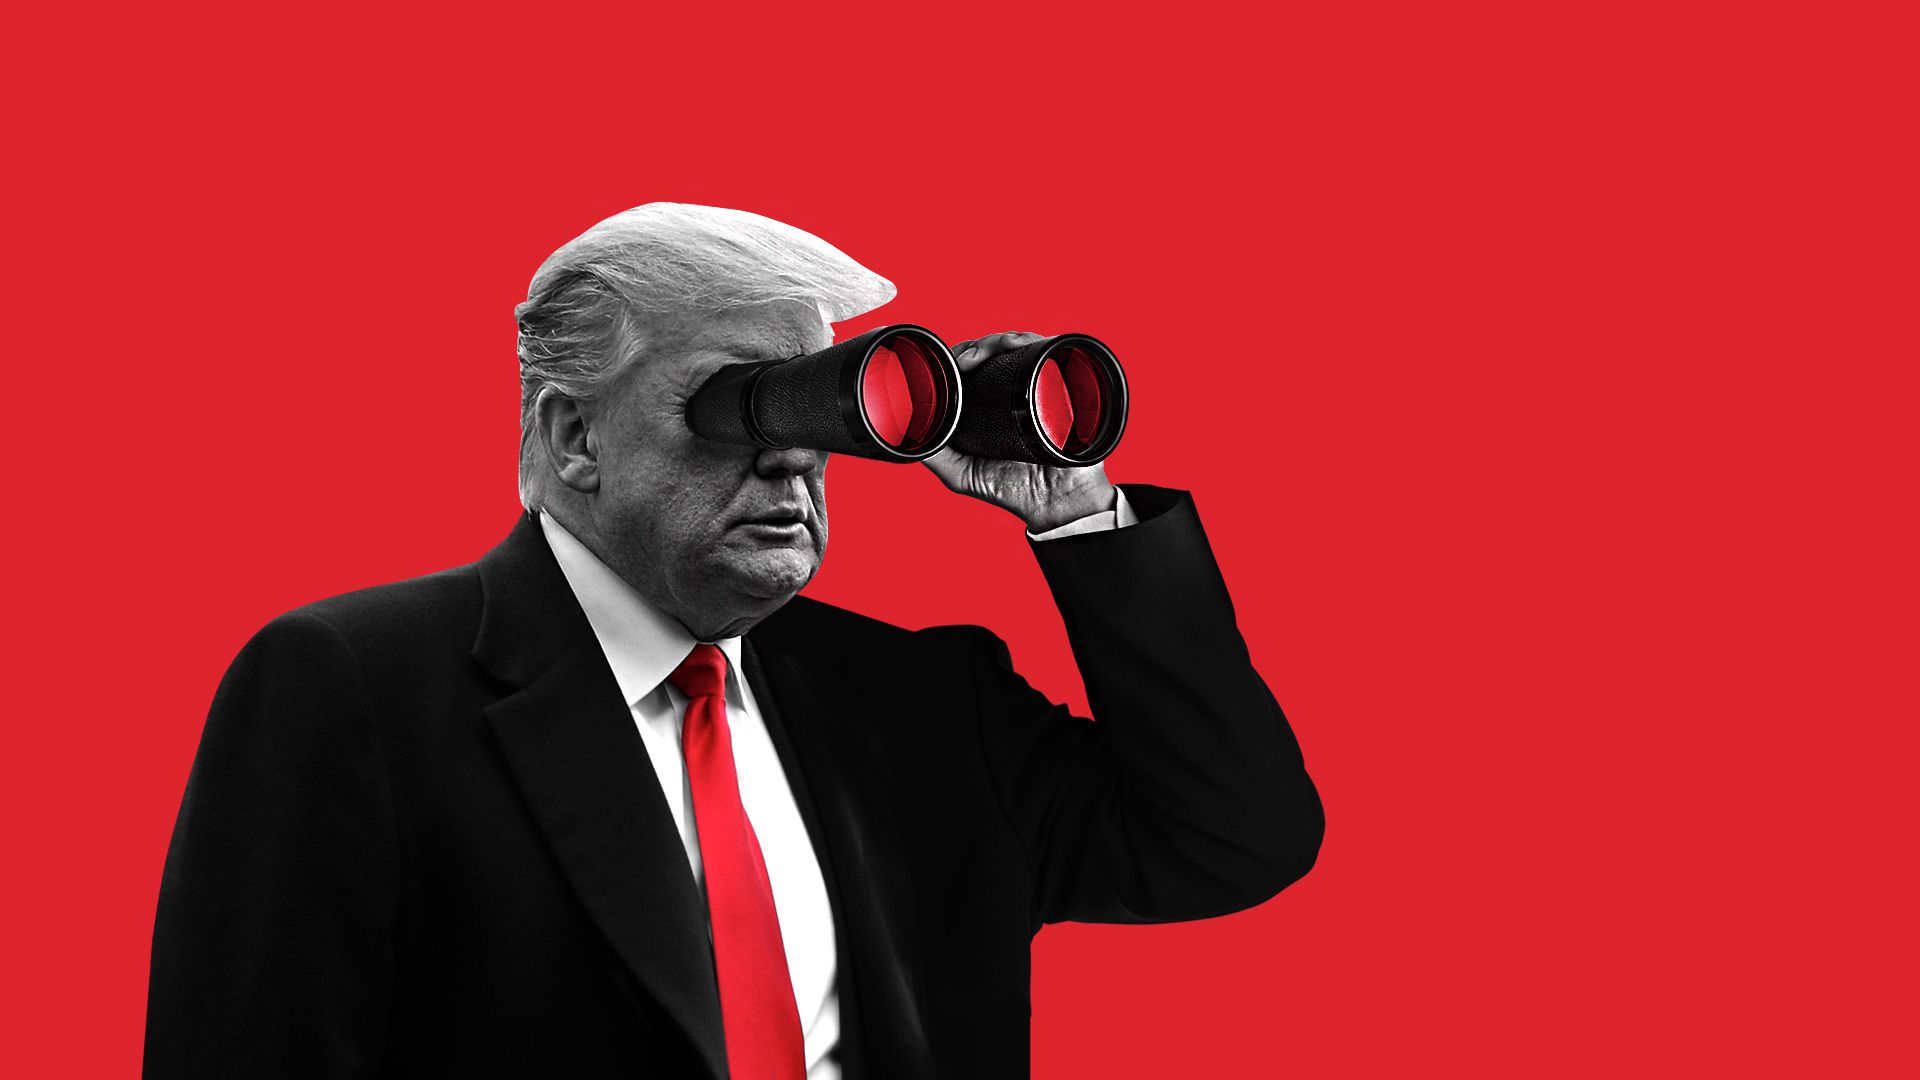 Illustration of Trump peering into the distance with binoculars